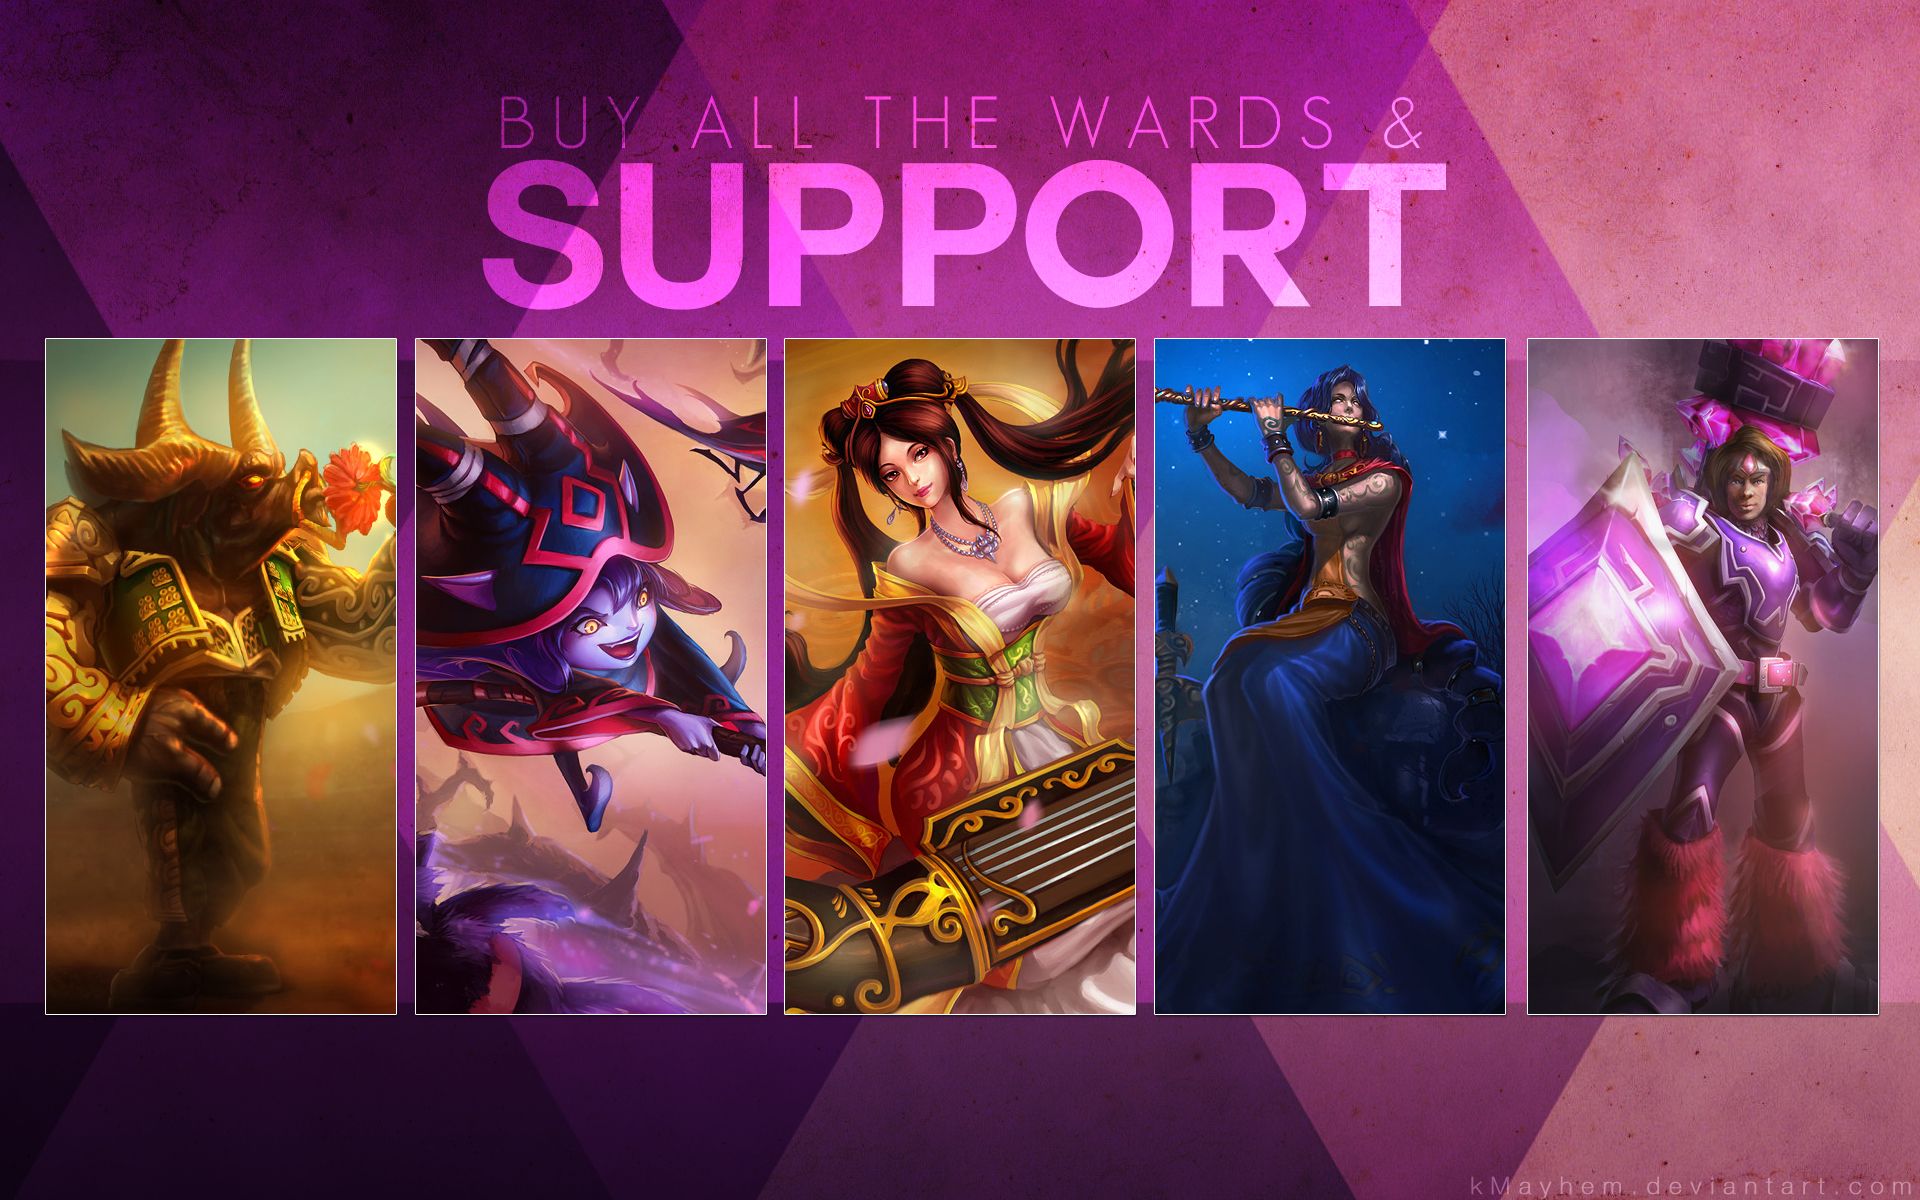  league of legends support champions hd wallpaper lol champion